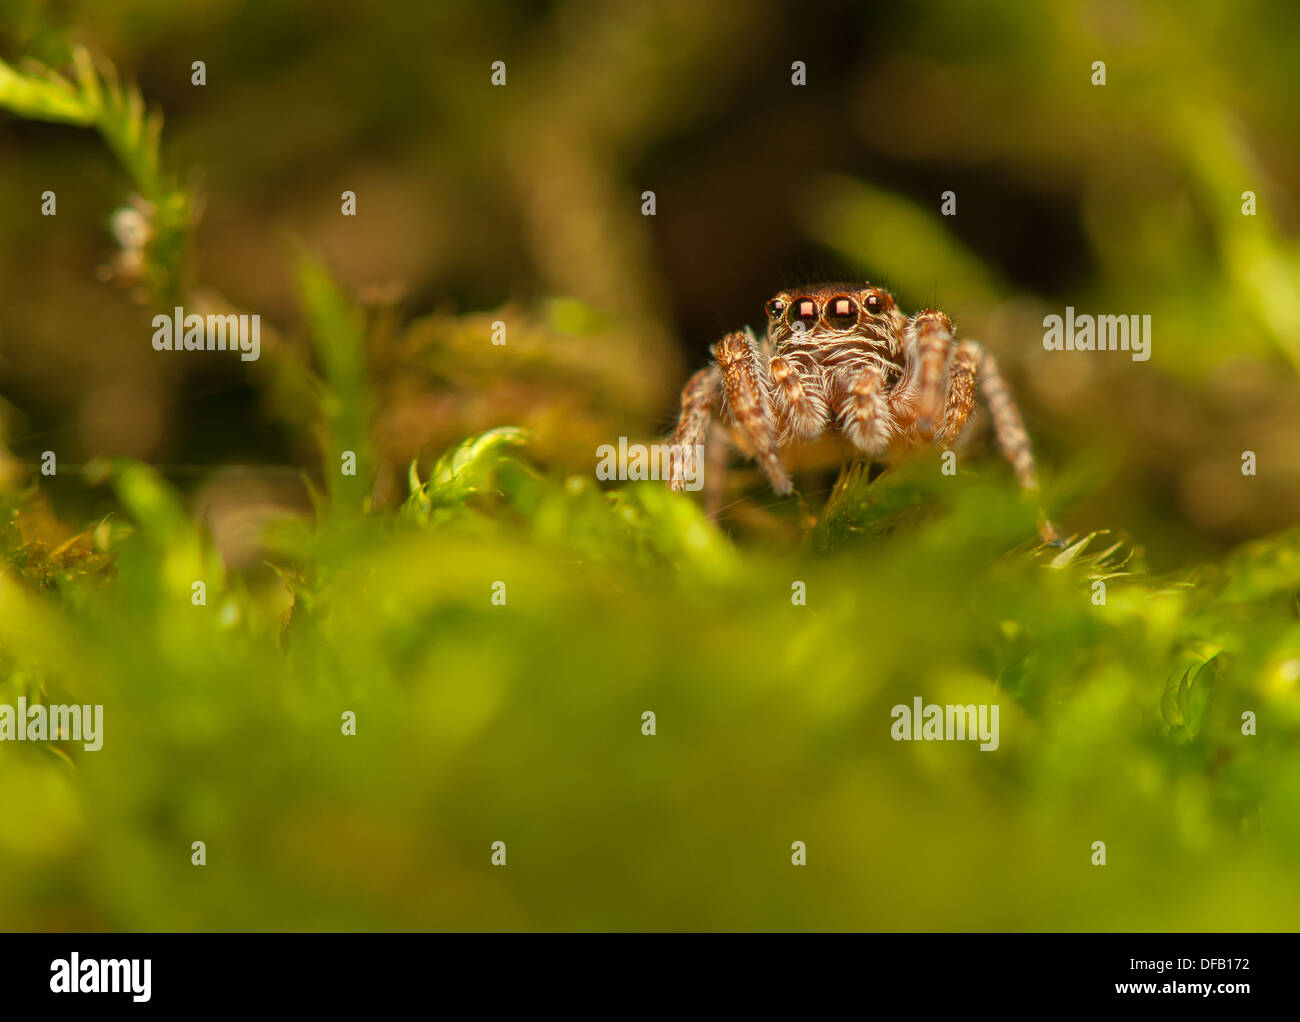 Evarcha - Jumping spider Stock Photo